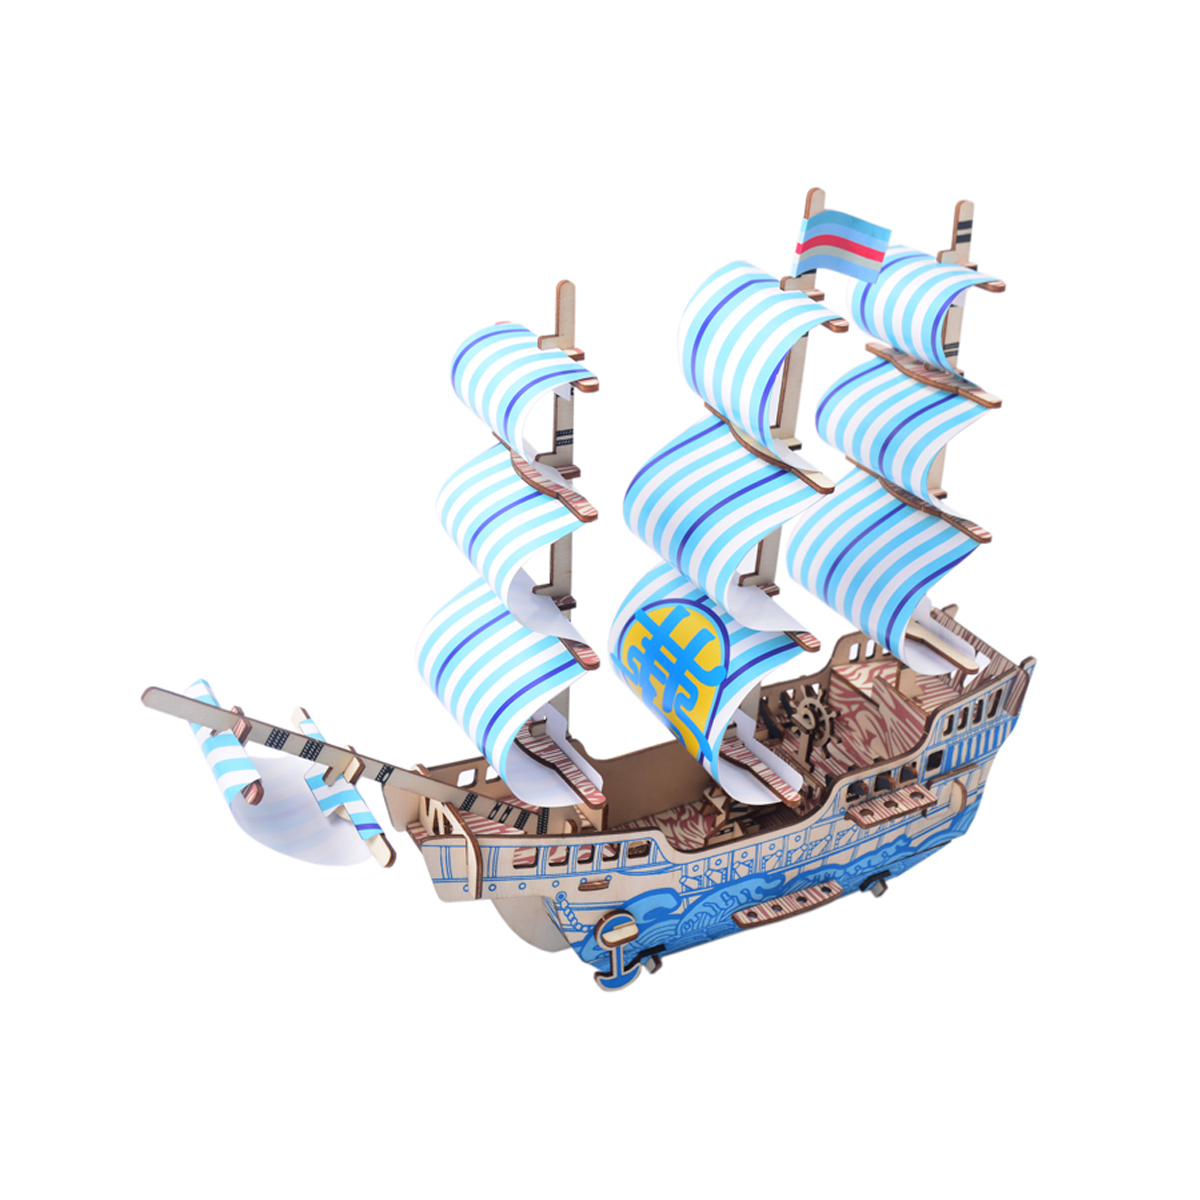 3D-Woodcraft-Assembly-Sailing-Series-Kit-Jigsaw-Puzzle-Decoration-Toy-Model-for-Kids-Gift-1635638-7